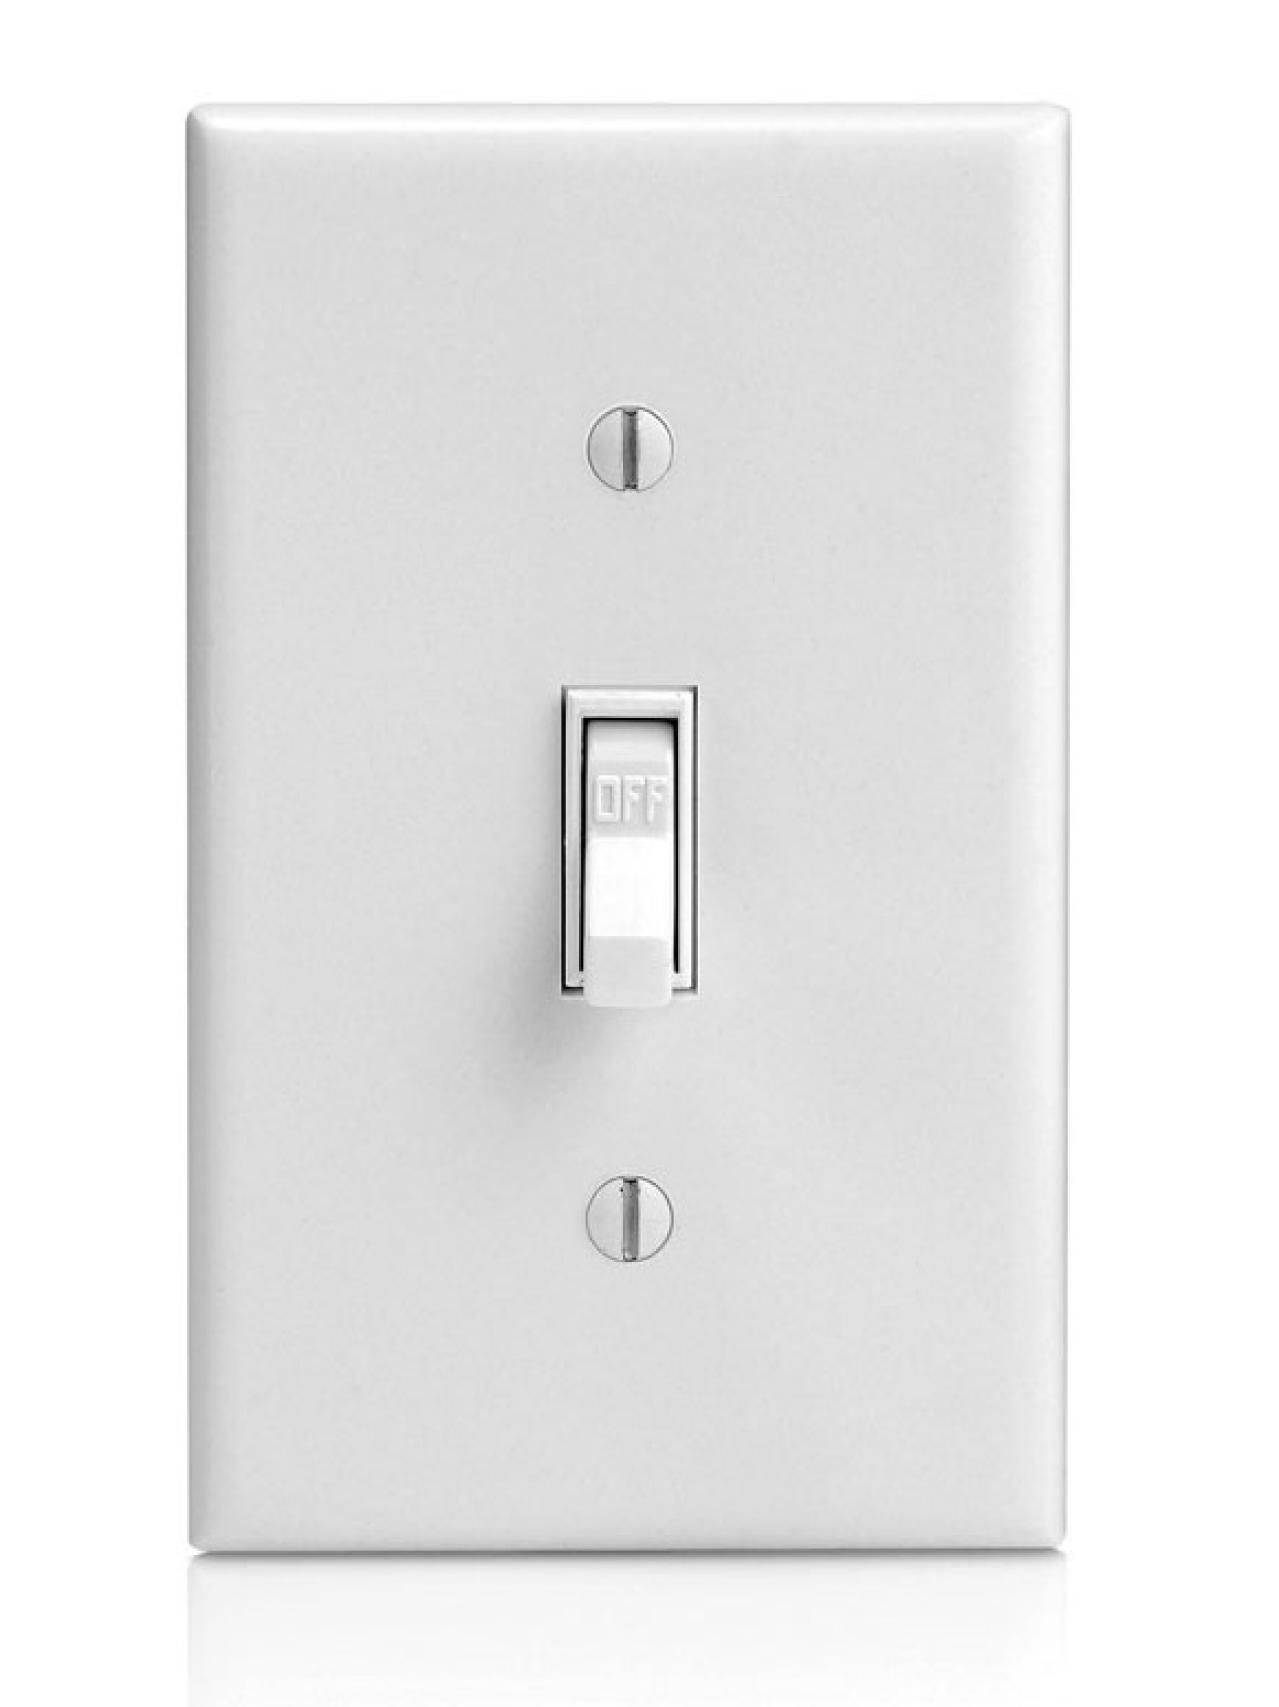 new-cool-light-switches-unique-light-switch-odd-stuff-of-new-cool-light-switches.jpg